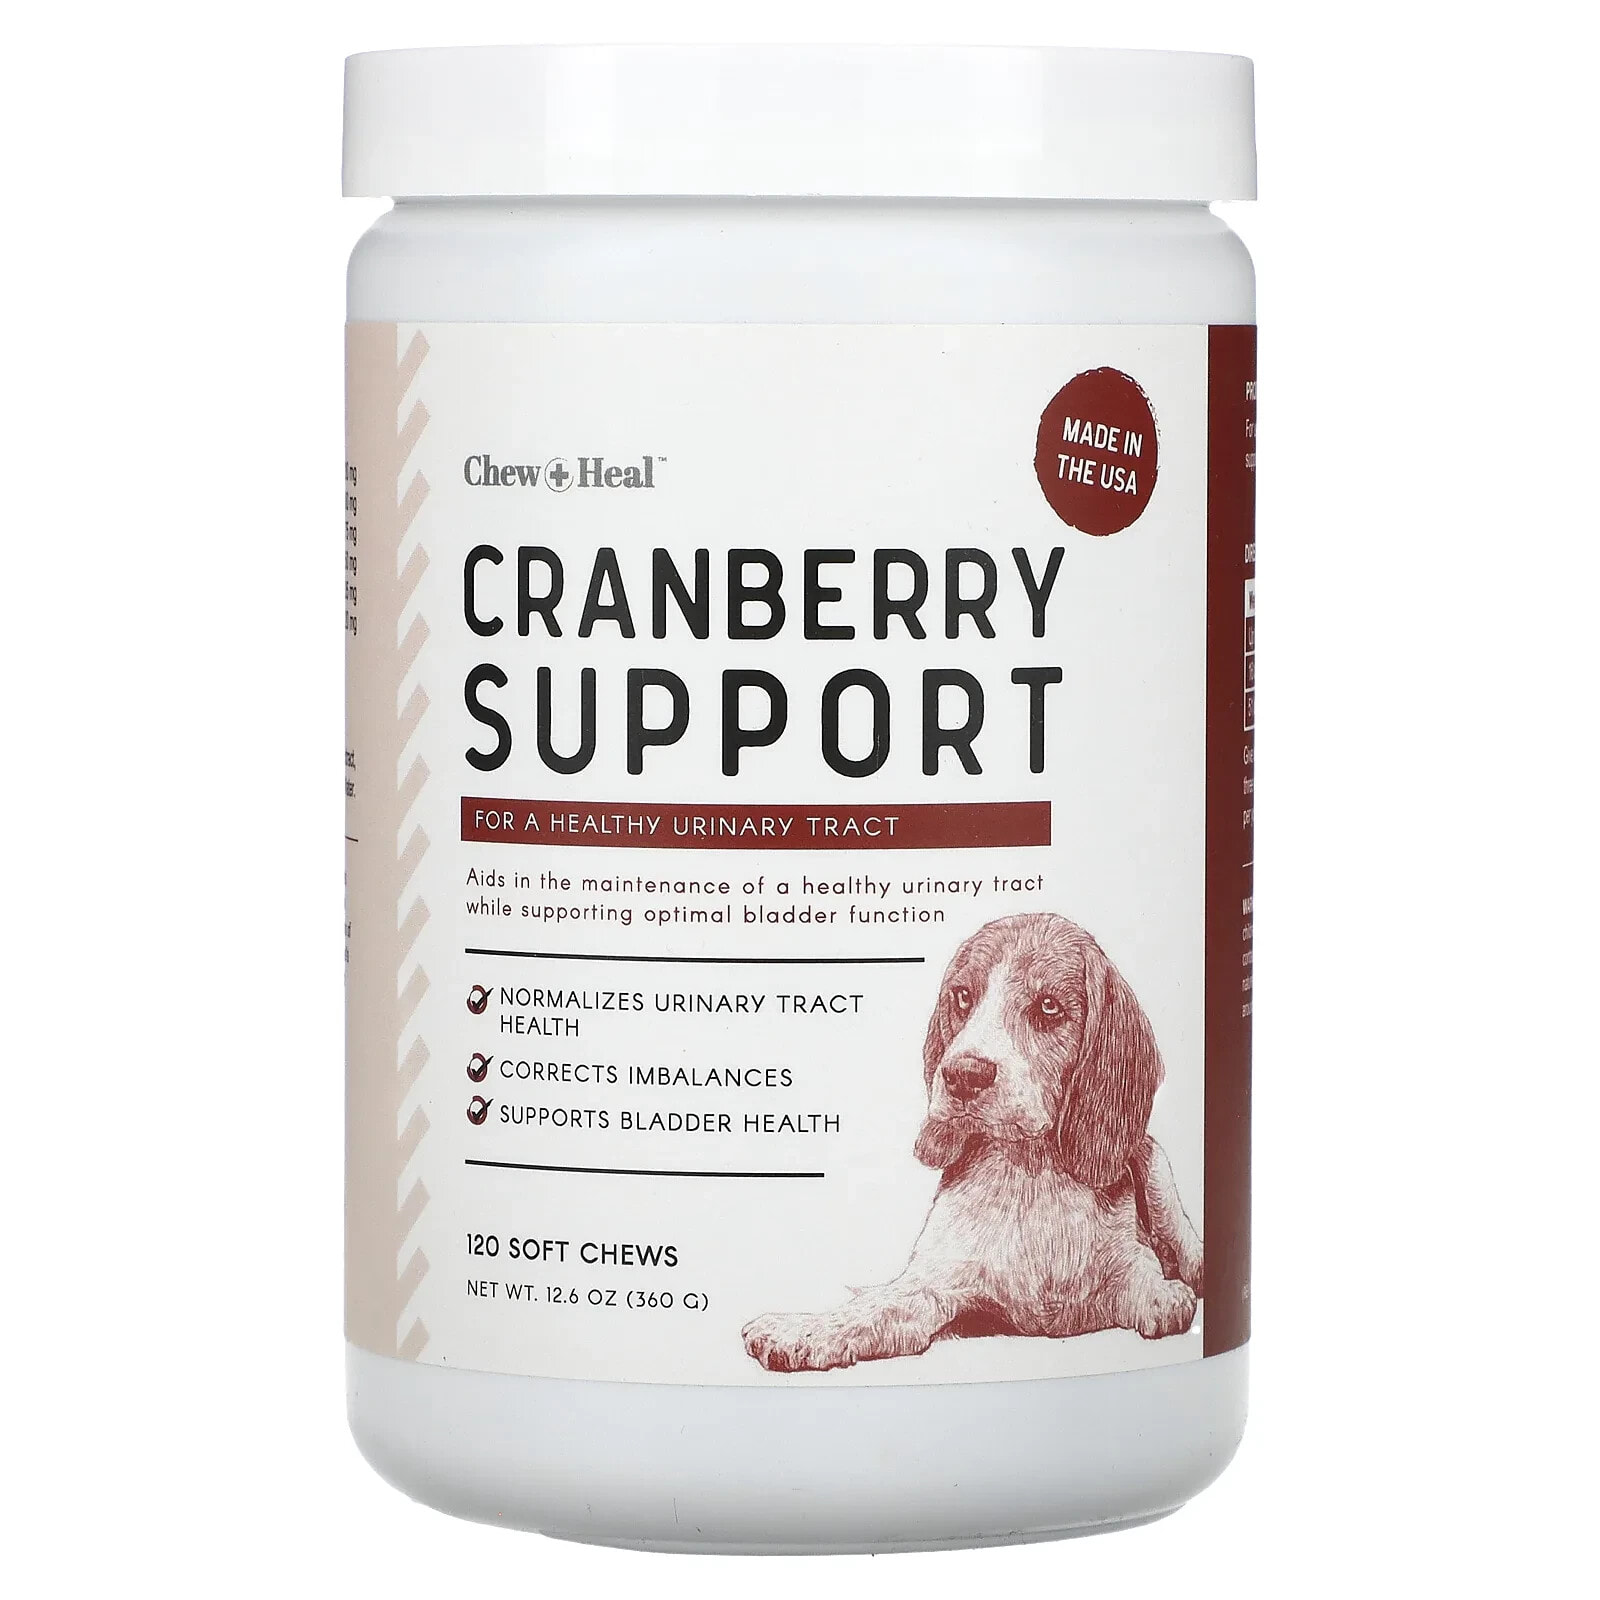 Cranberry Support, For Dogs, 120 Soft Chews, 12.6 oz (360 g)